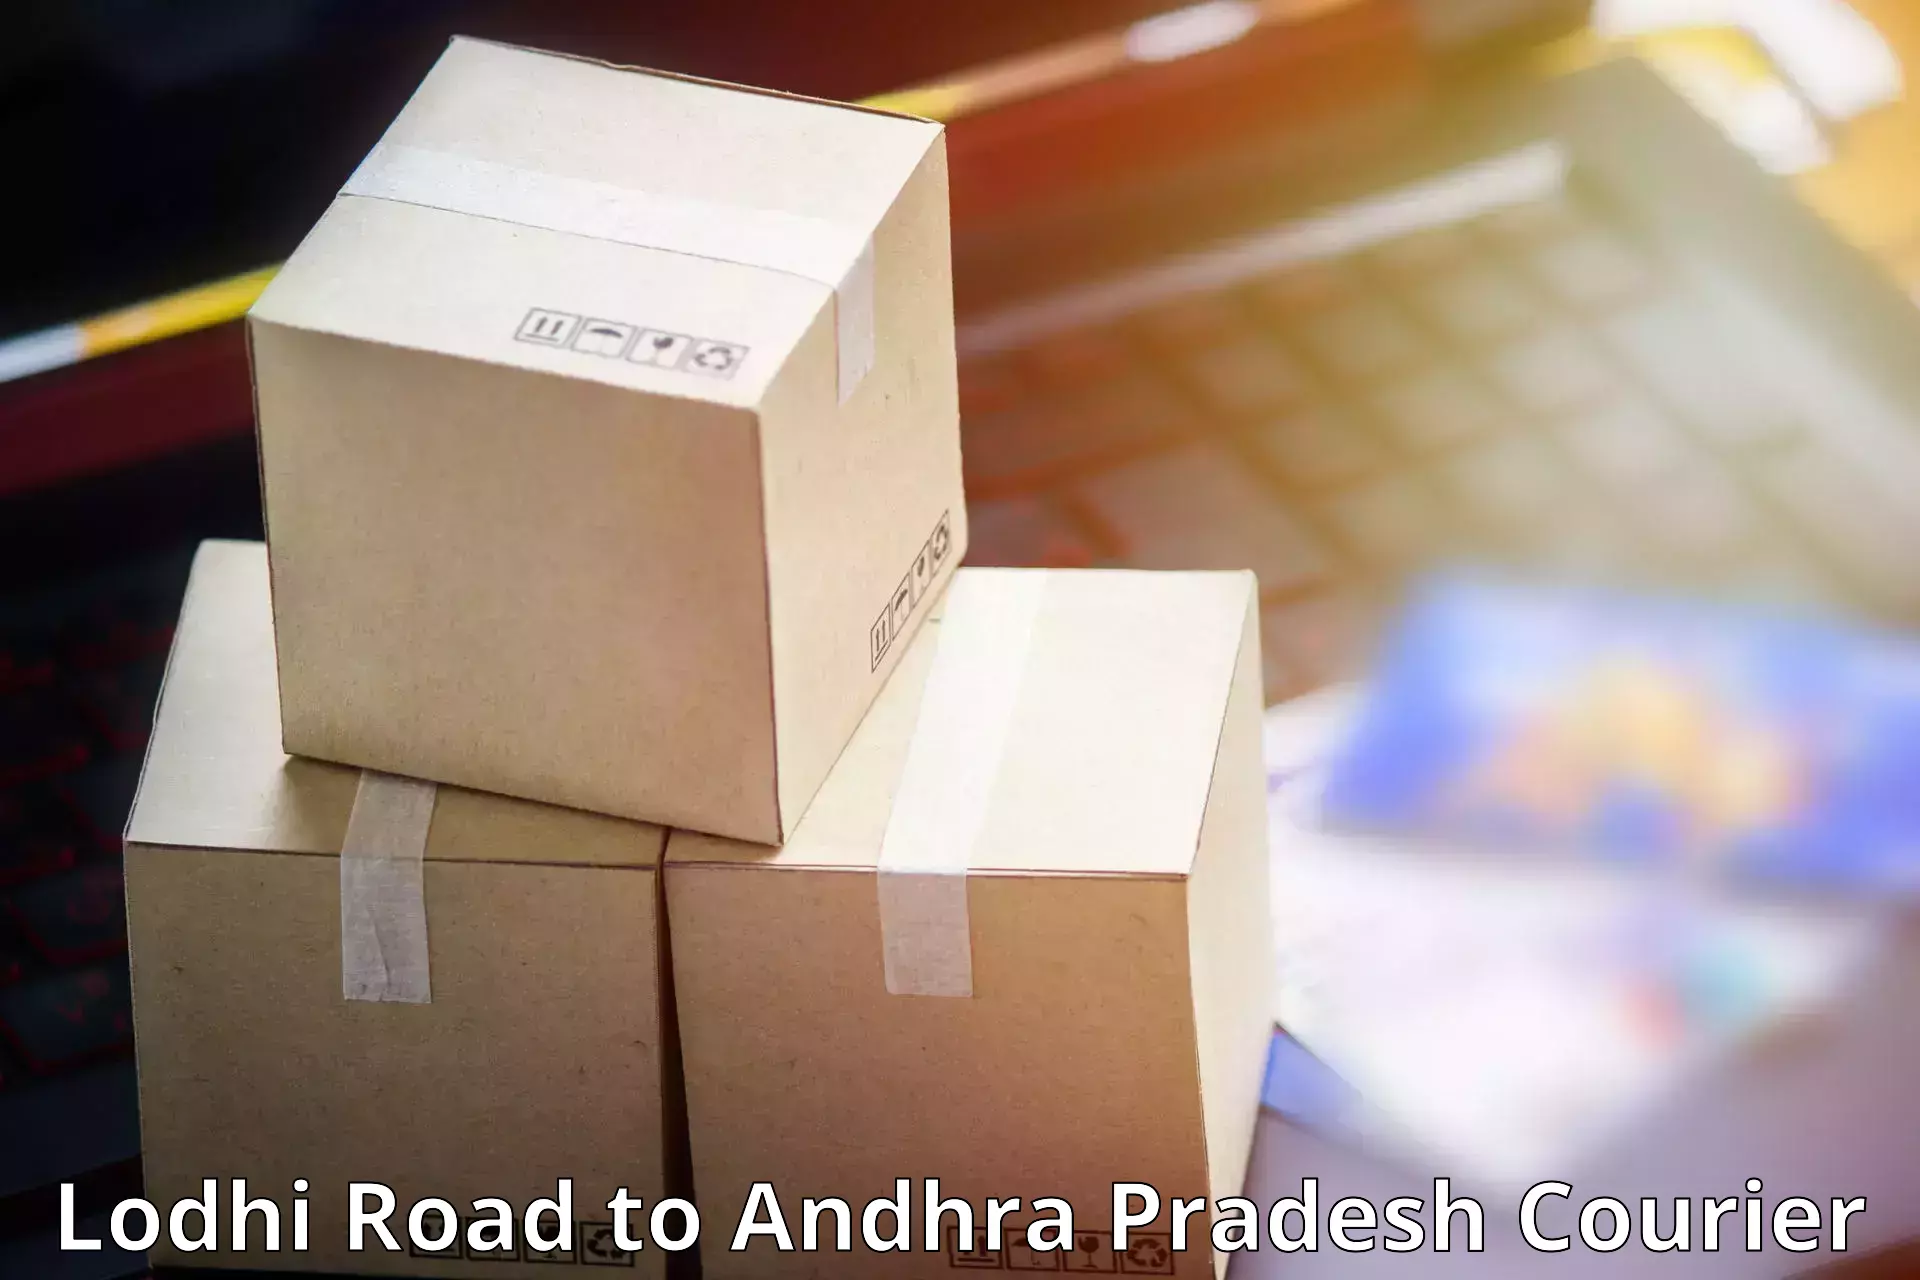 Courier service efficiency in Lodhi Road to Bhattiprolu